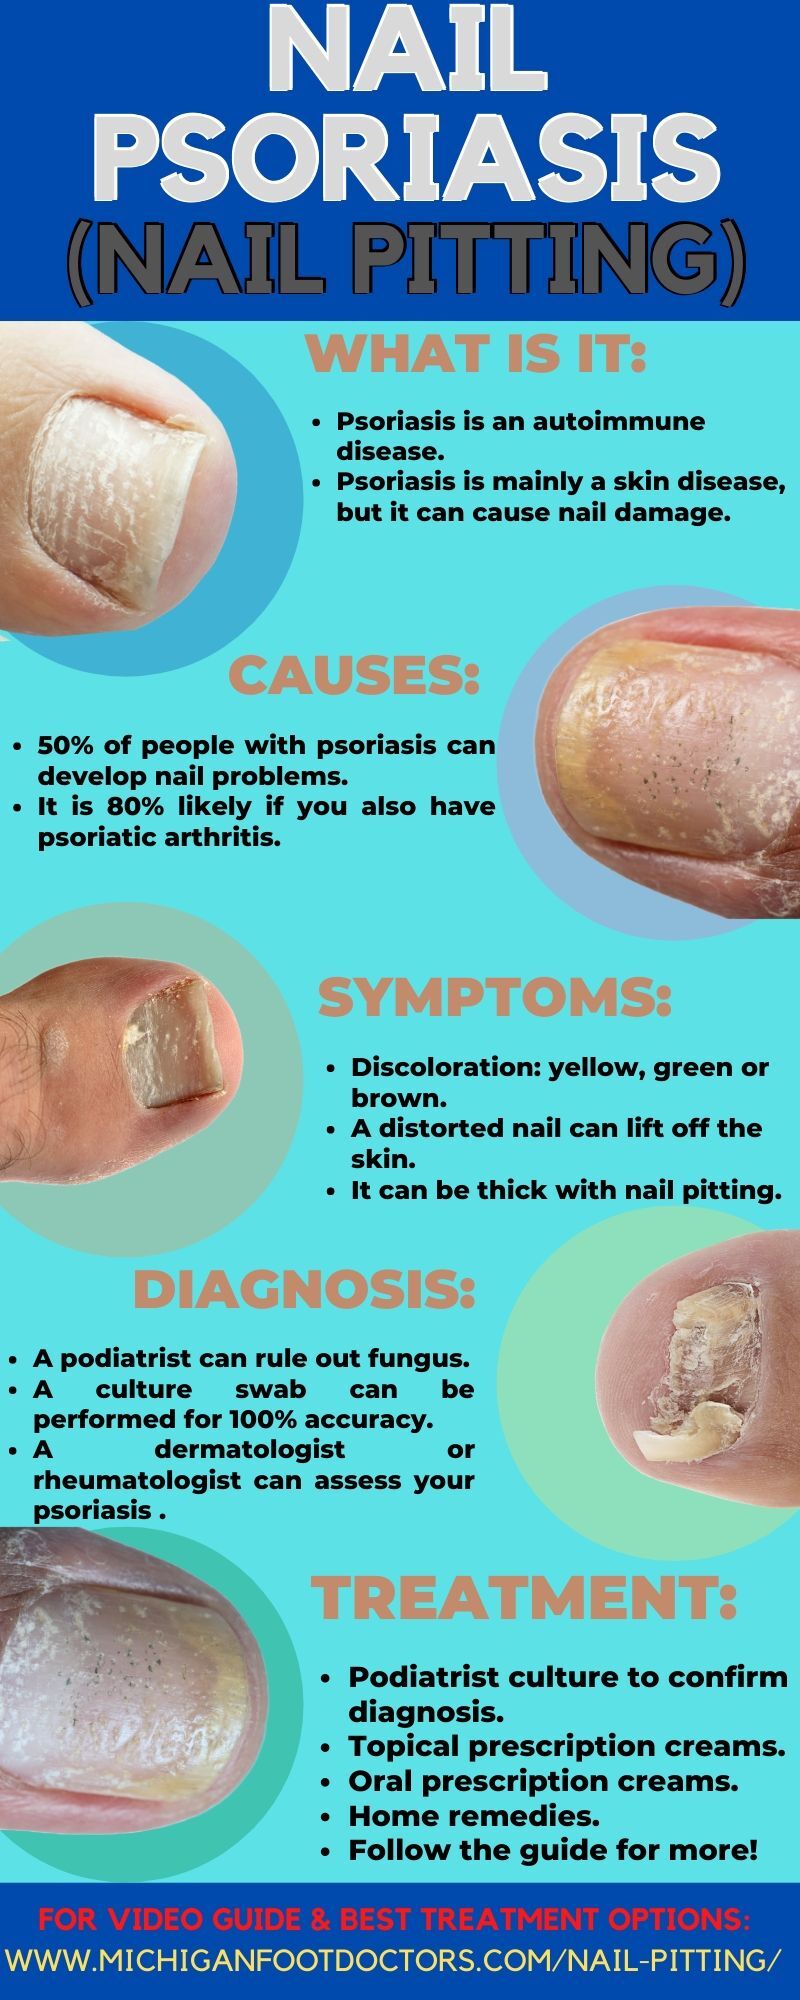 Psoriasis | The Physical Therapy Advisor